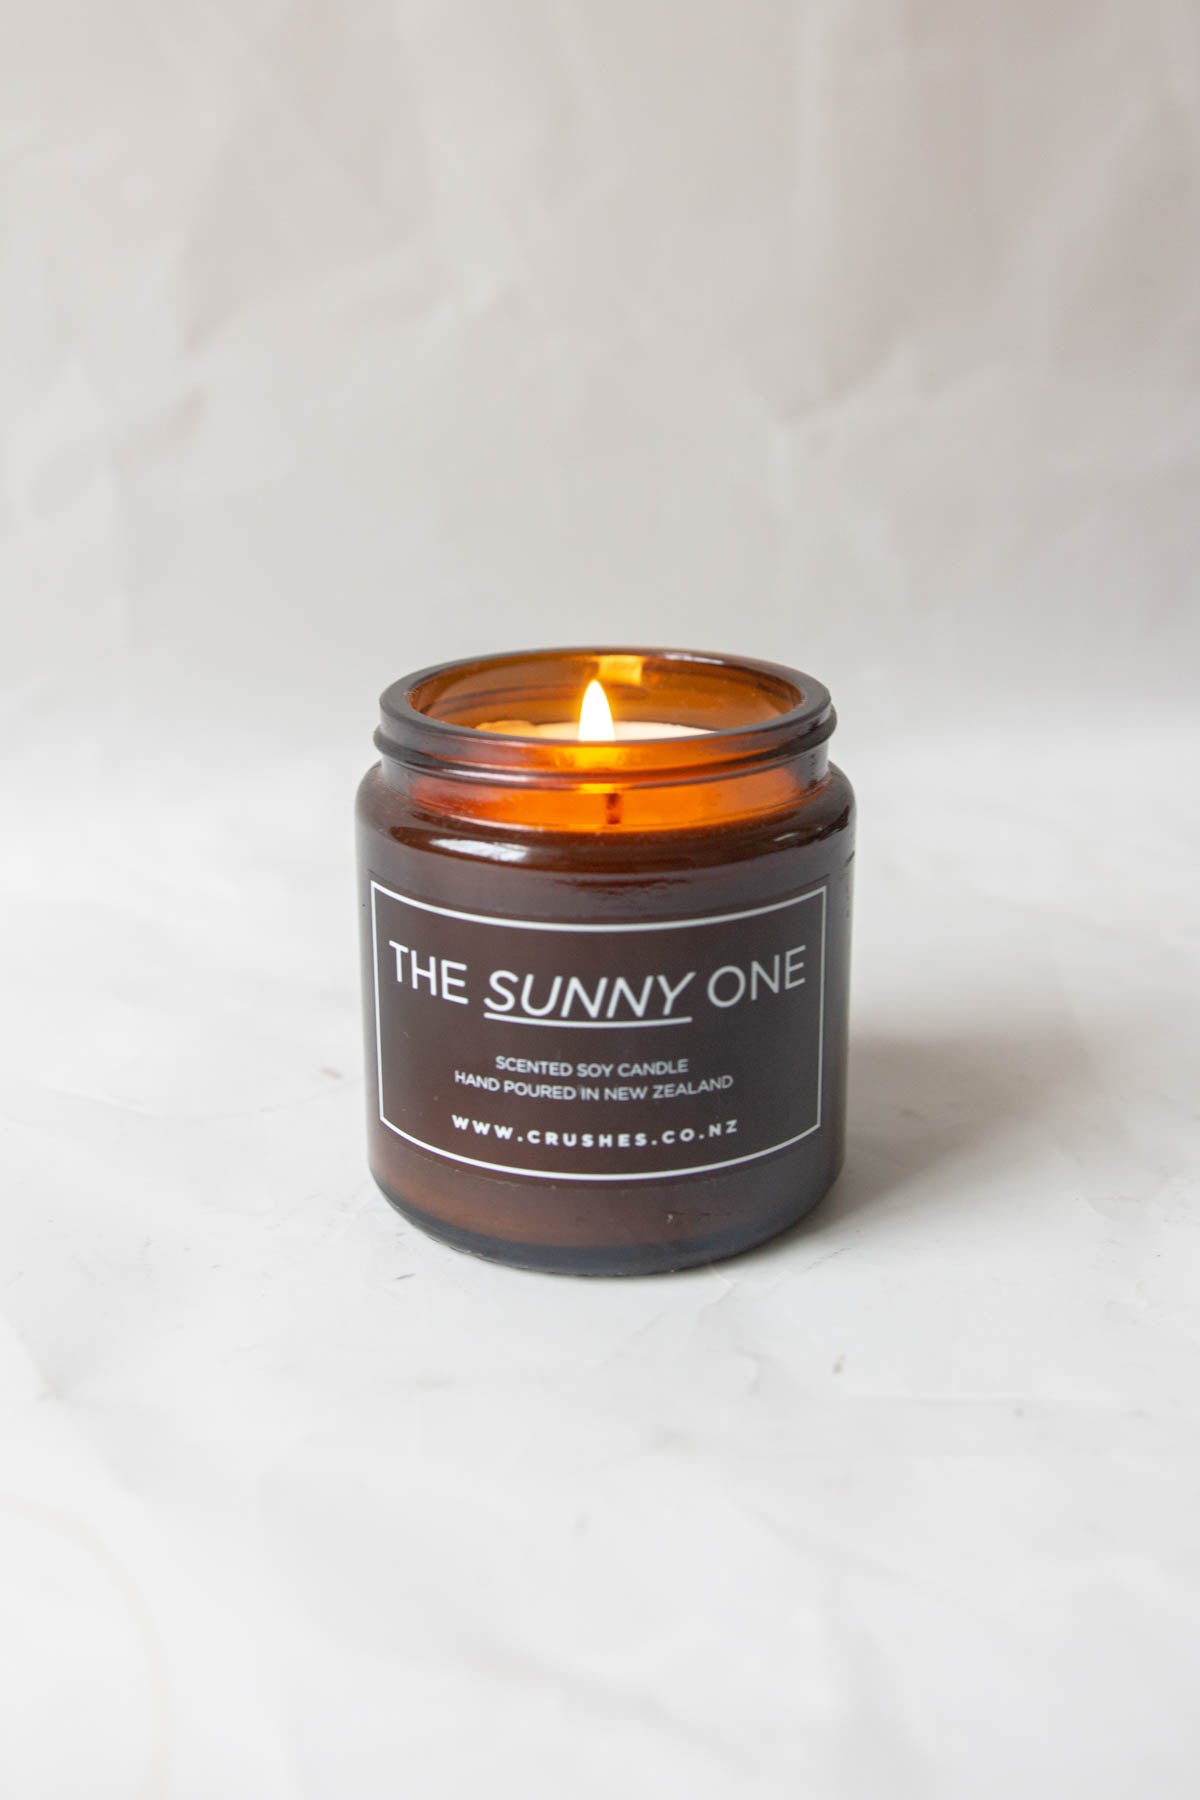 The Sunny One - Scented Soy Candle